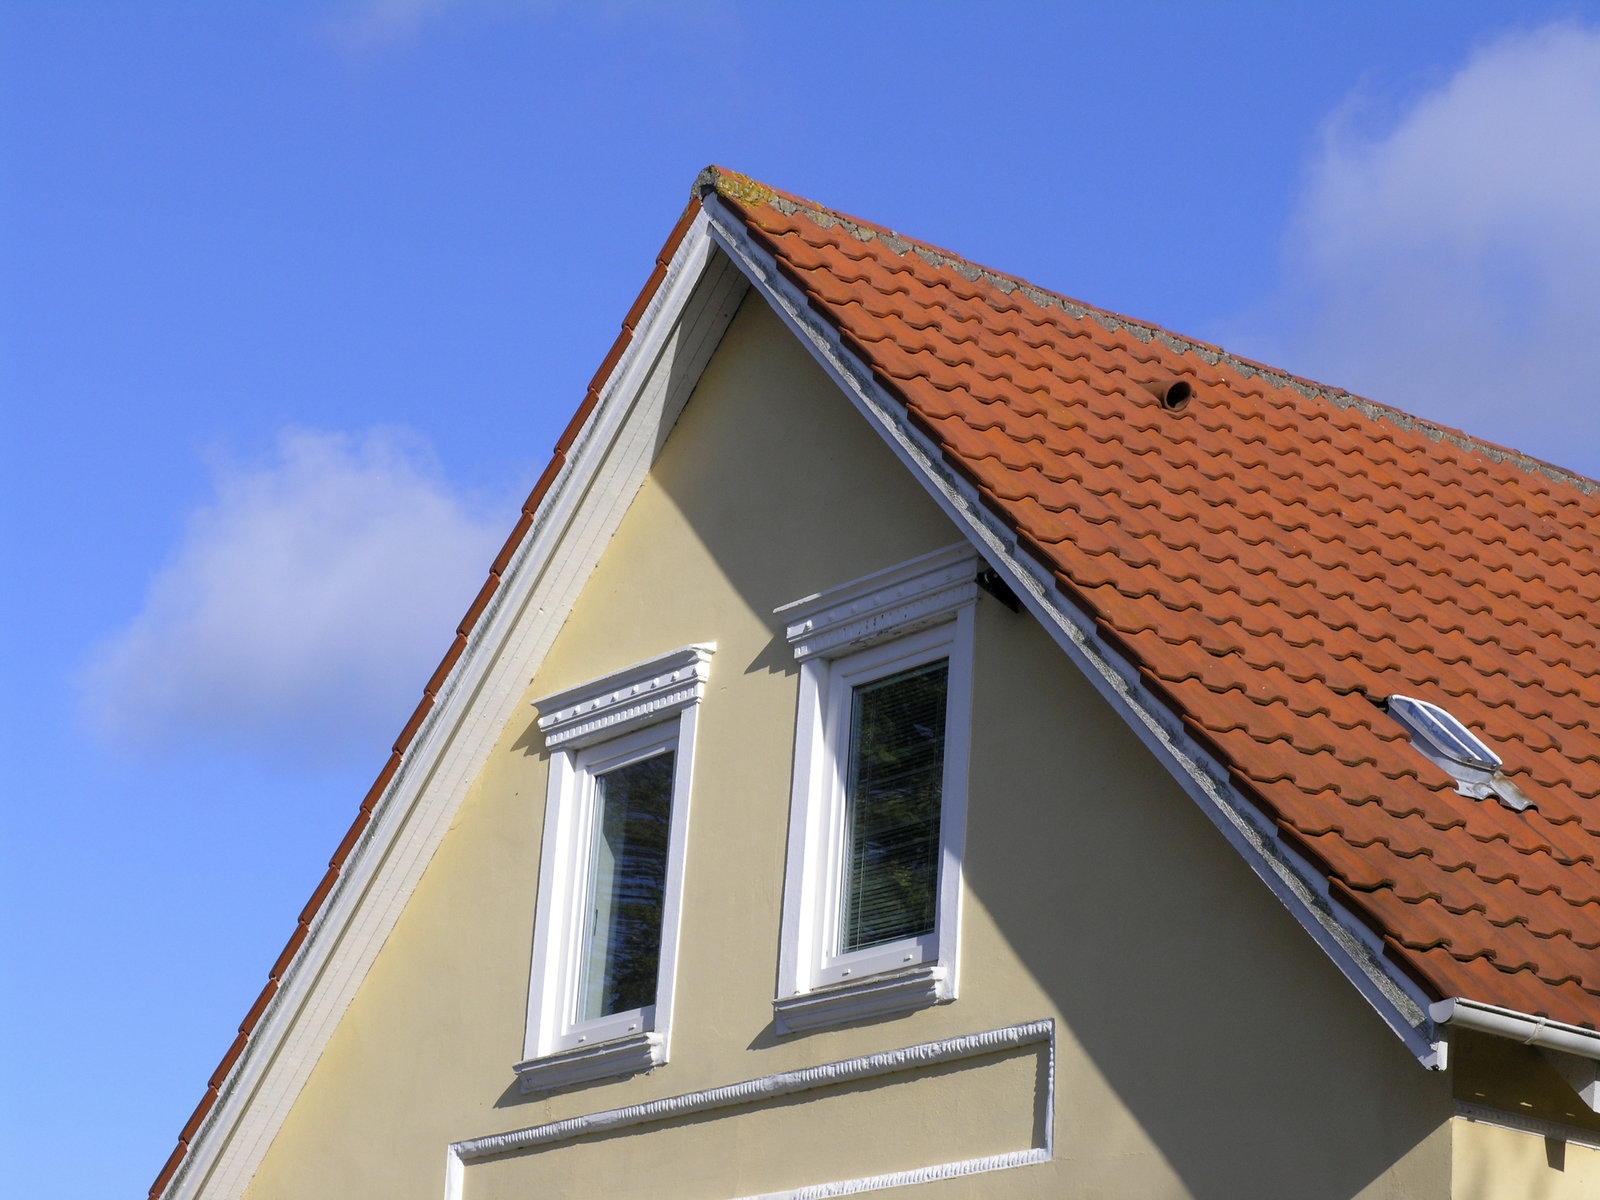 A Step-by-Step Guide to Replacing a Broken Roof Tile